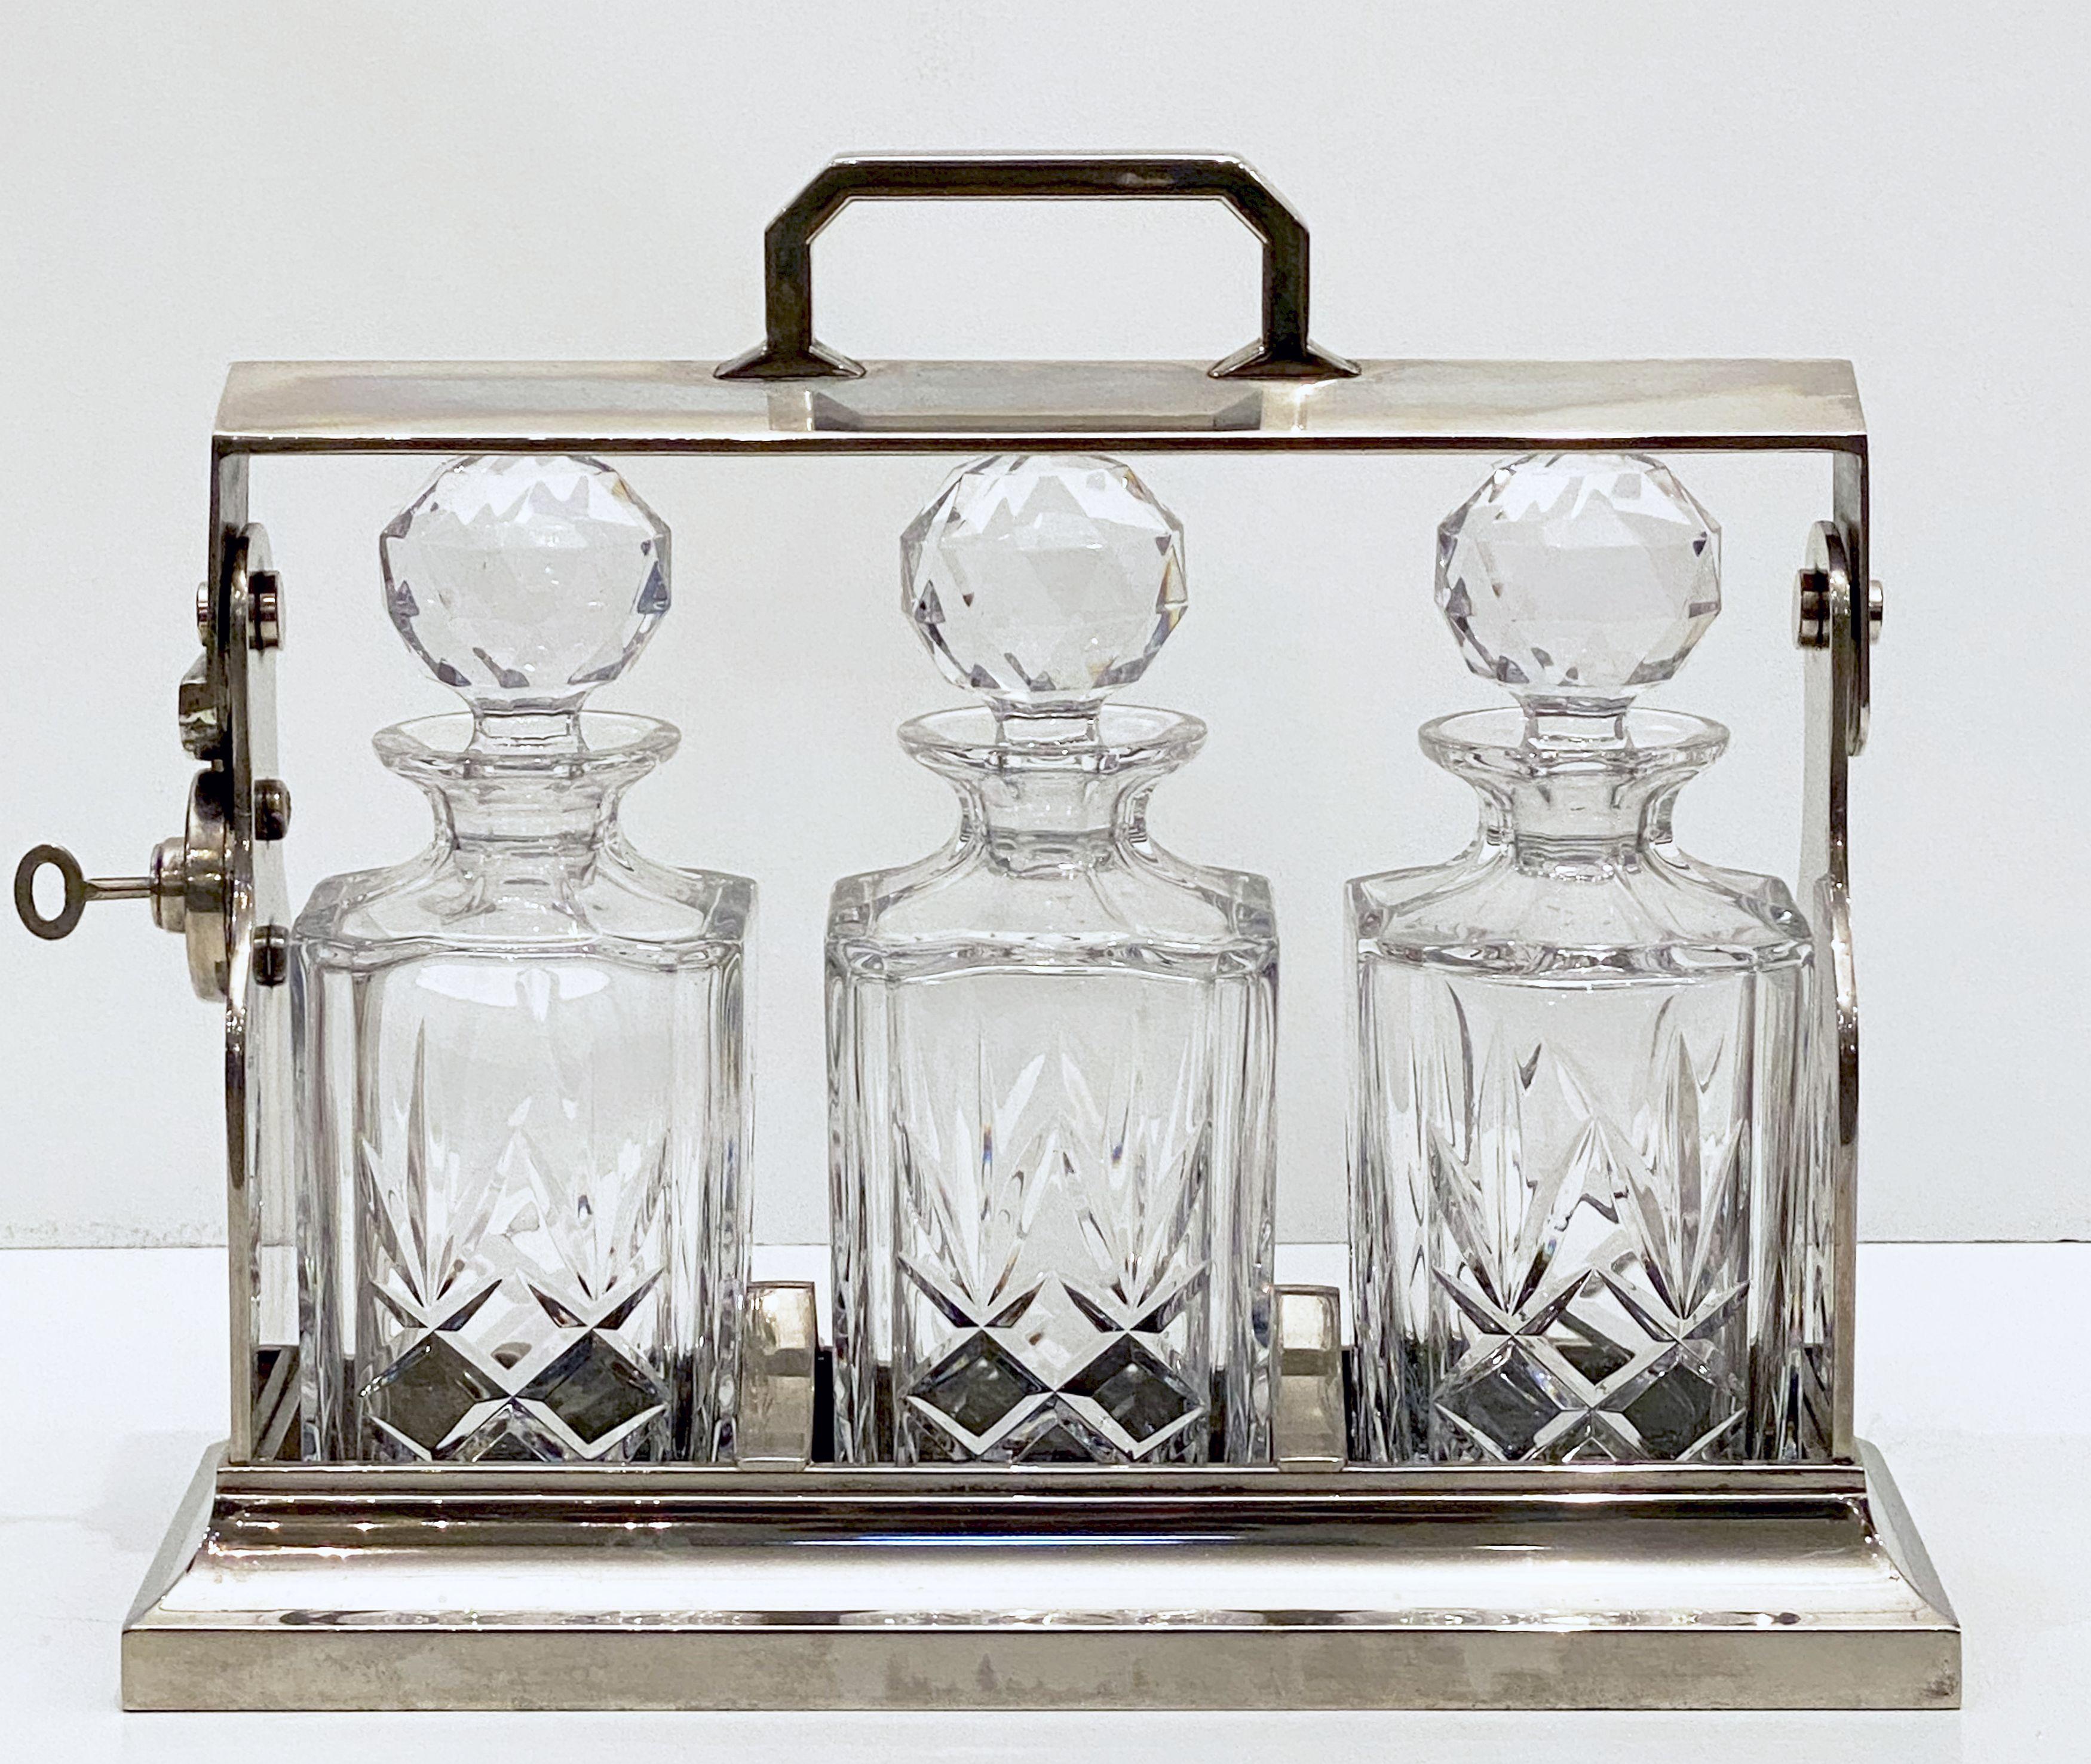 A handsome large Tantalus drinks or spirits decanter set of plate silver from the Edwardian era, c.1900, made by the celebrated English silversmiths, Mappin and Webb.

The case comes with a working key that requires a slight turn left. The lock